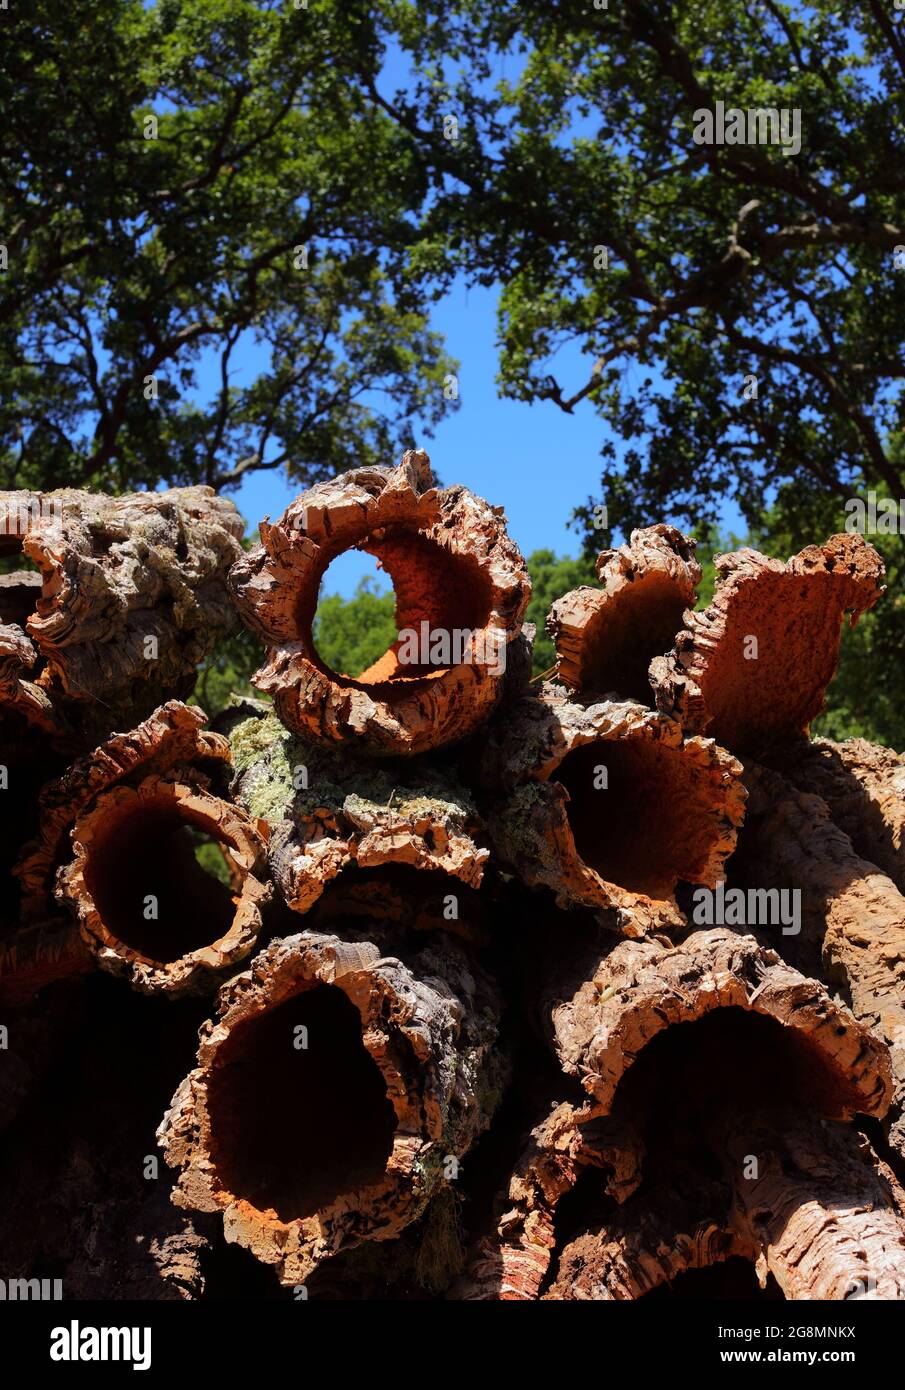 Portugal, Alentejo region. Newly harvested cork oak bark drying in the sunshine. (unprocessed cork) Natural, sustainable resource. Shallow focus Stock Photo